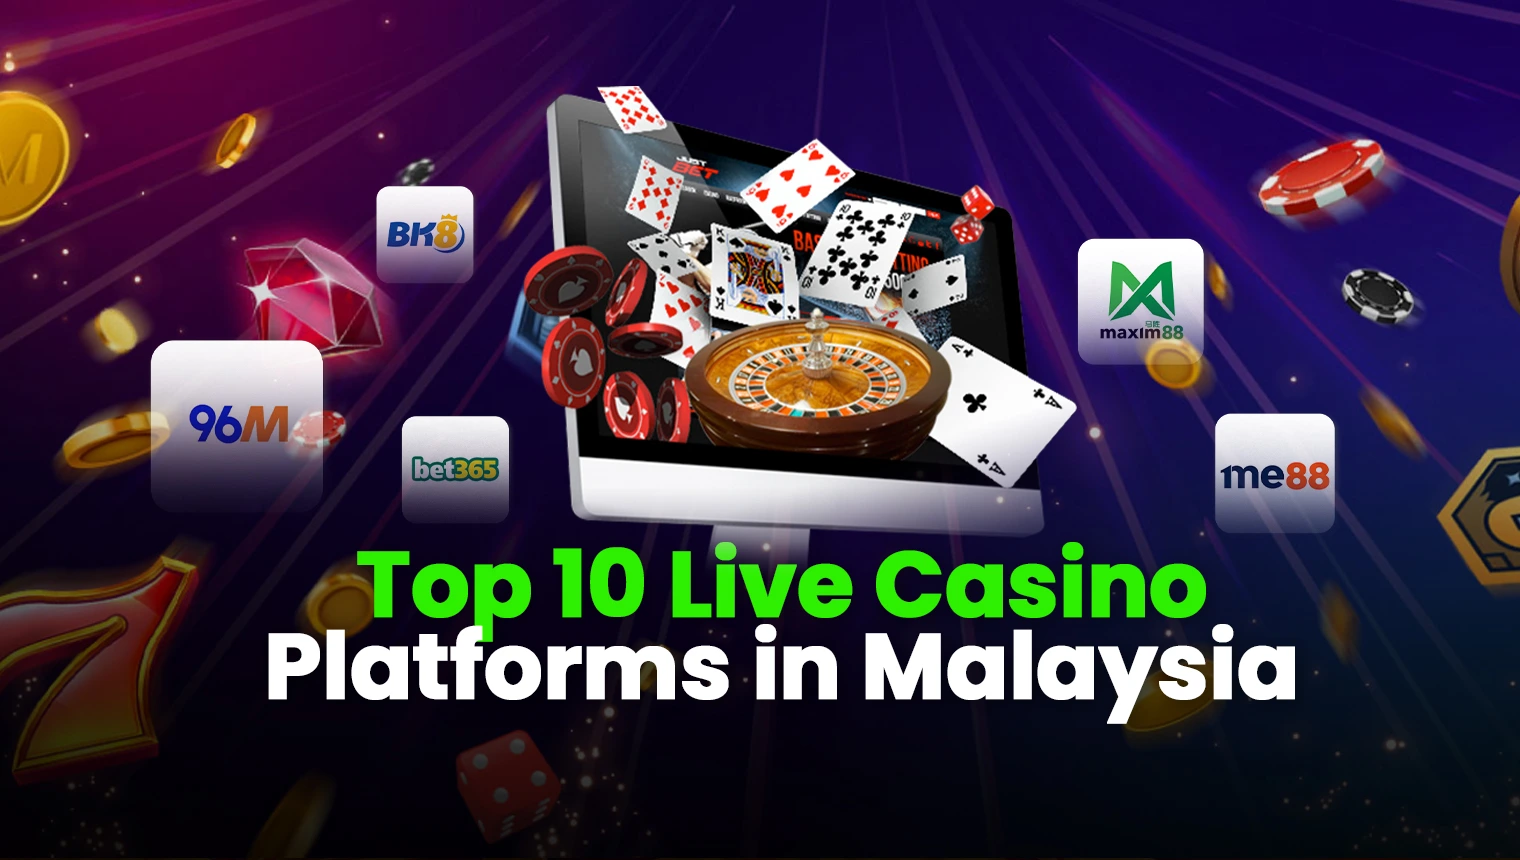 Top 10 Live Casino Platforms in Malaysia